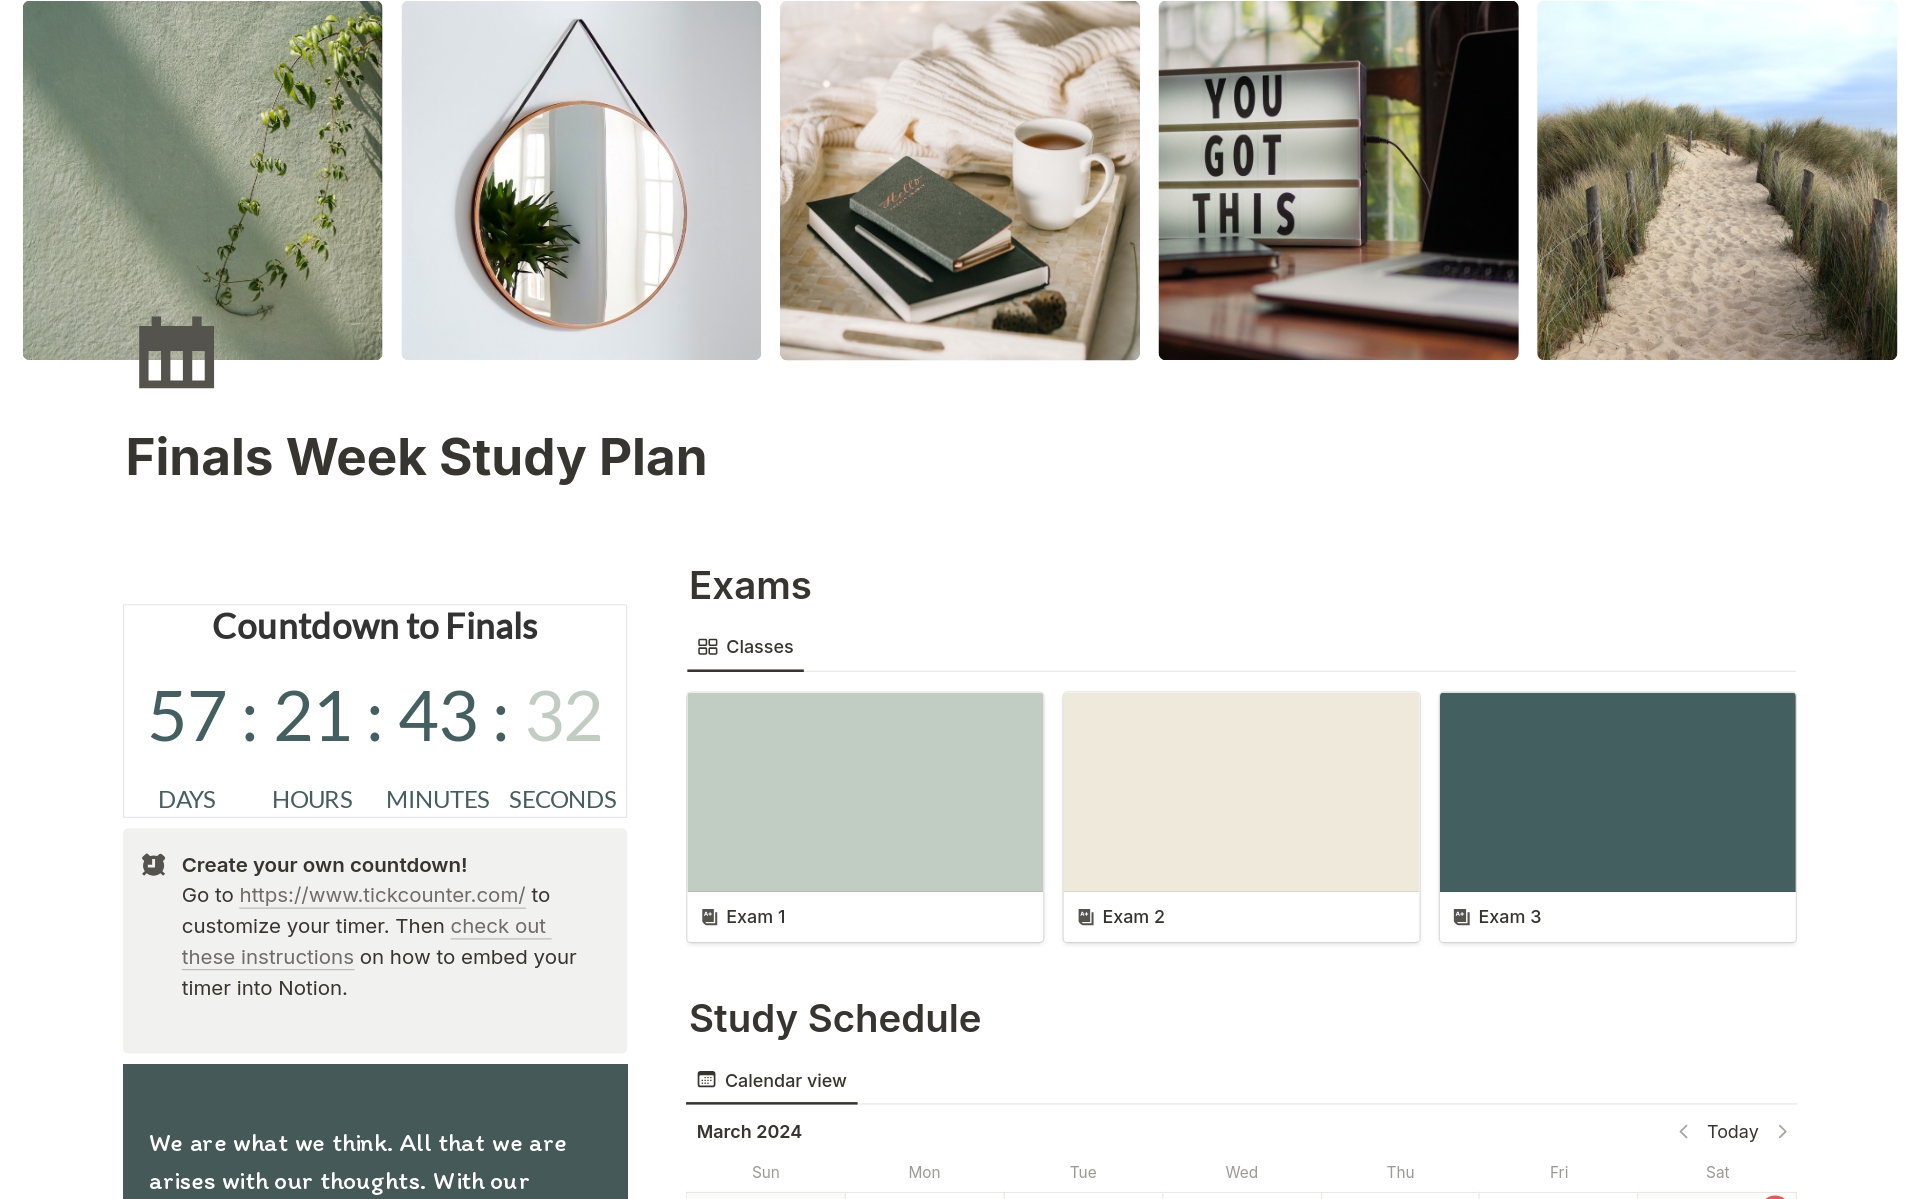 Transform your study routine with our free Finals Week Study Planner Notion template! Organize study content, create to-do lists, track progress, and schedule study sessions—all in one place. Level up your study game!